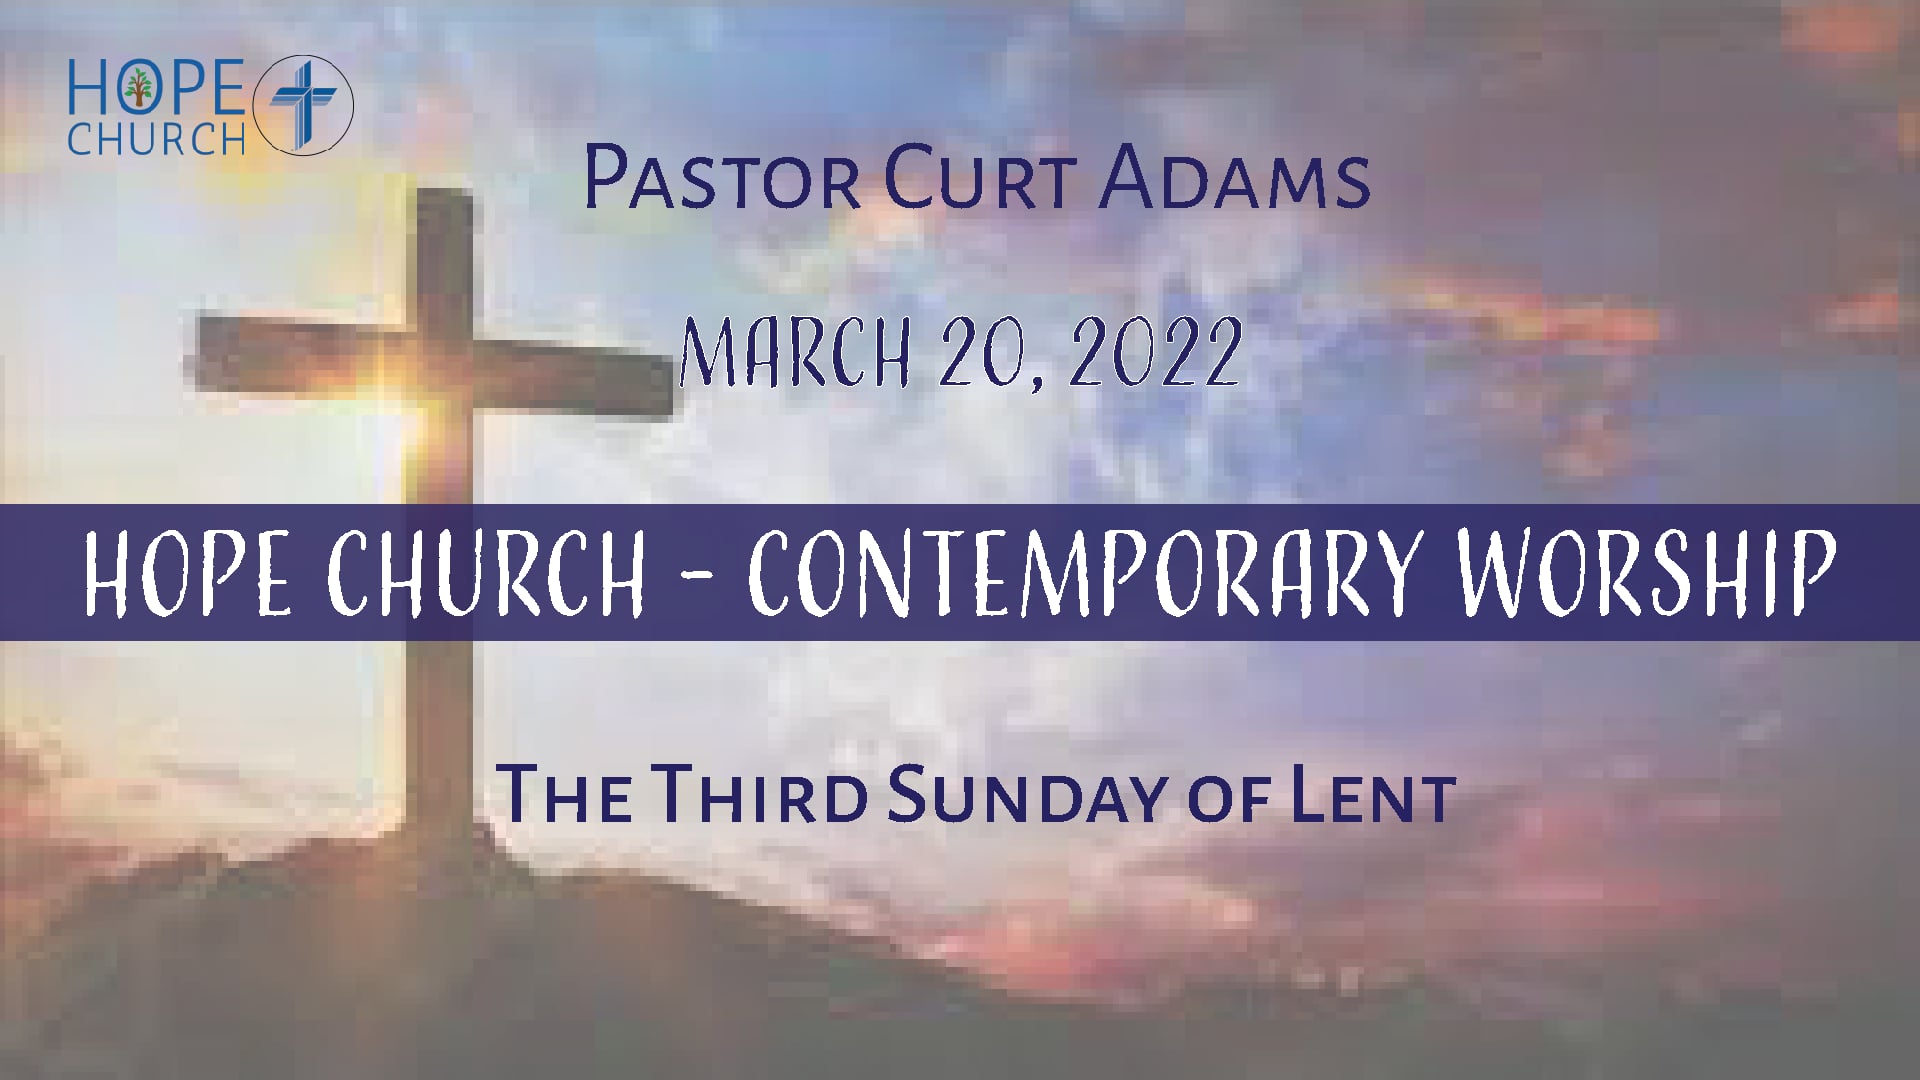 Hope Church - Contemporary Worship March 20, 2022